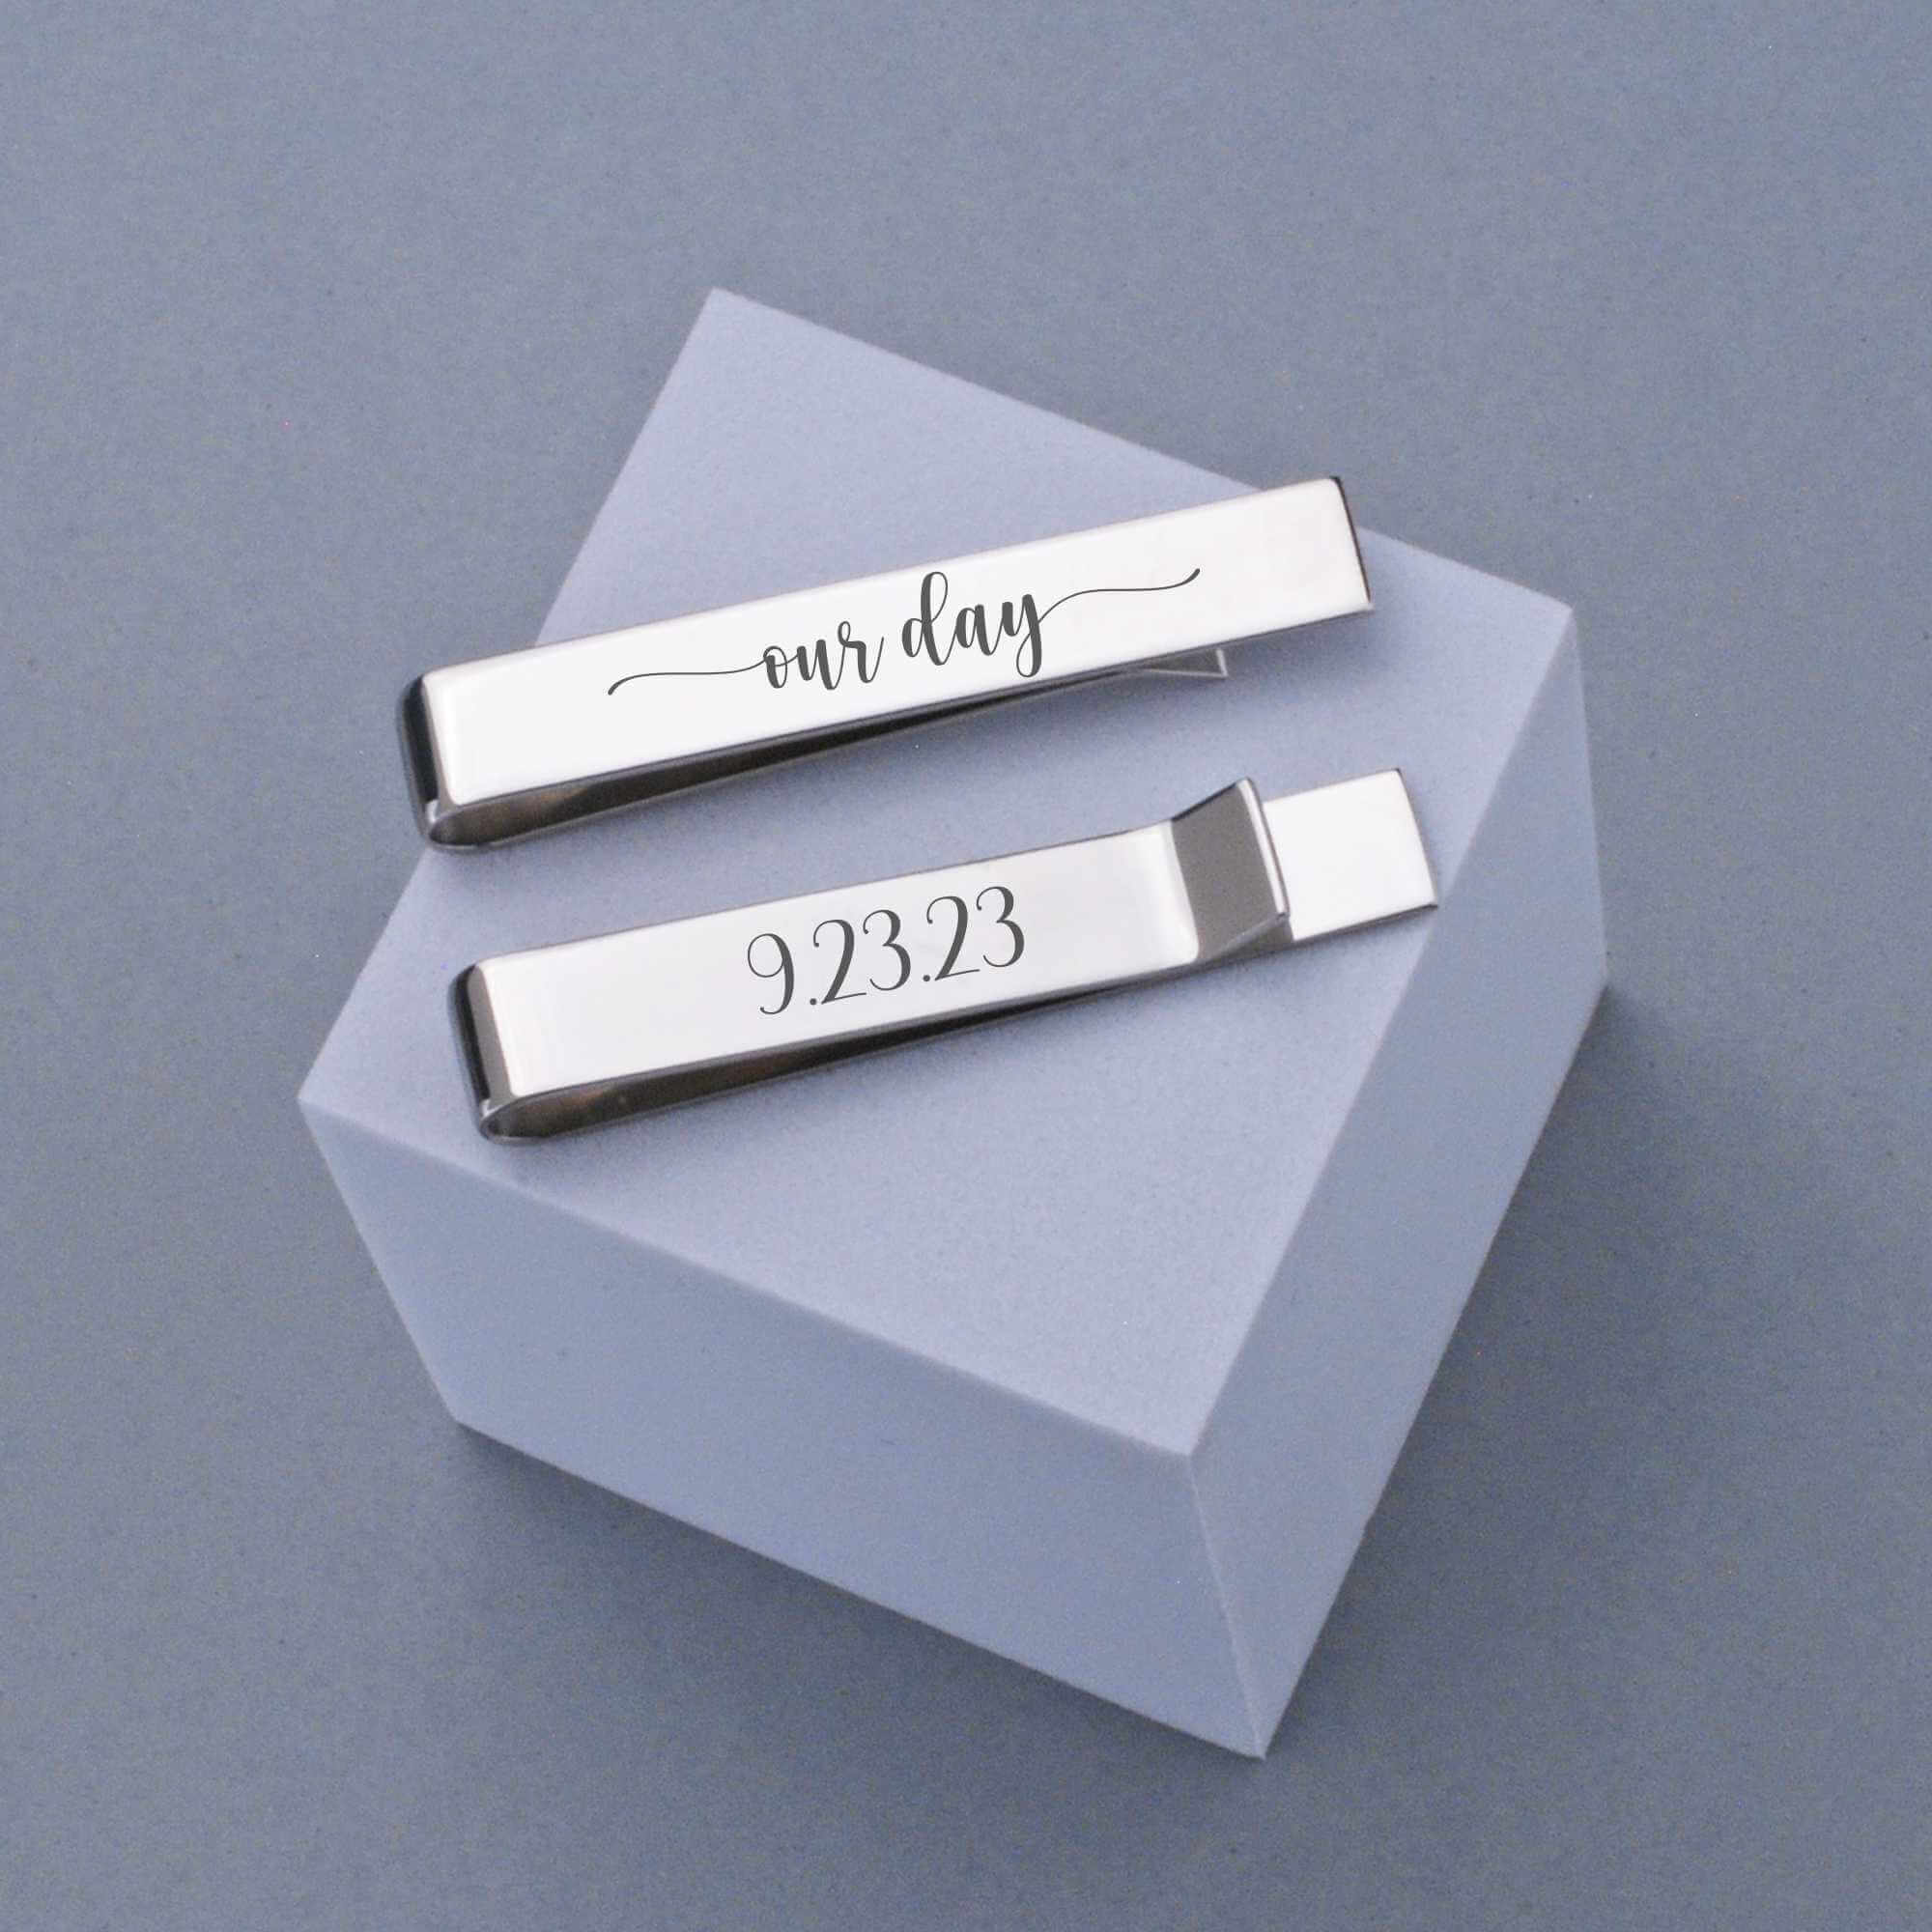 Our Day - Tie Clip